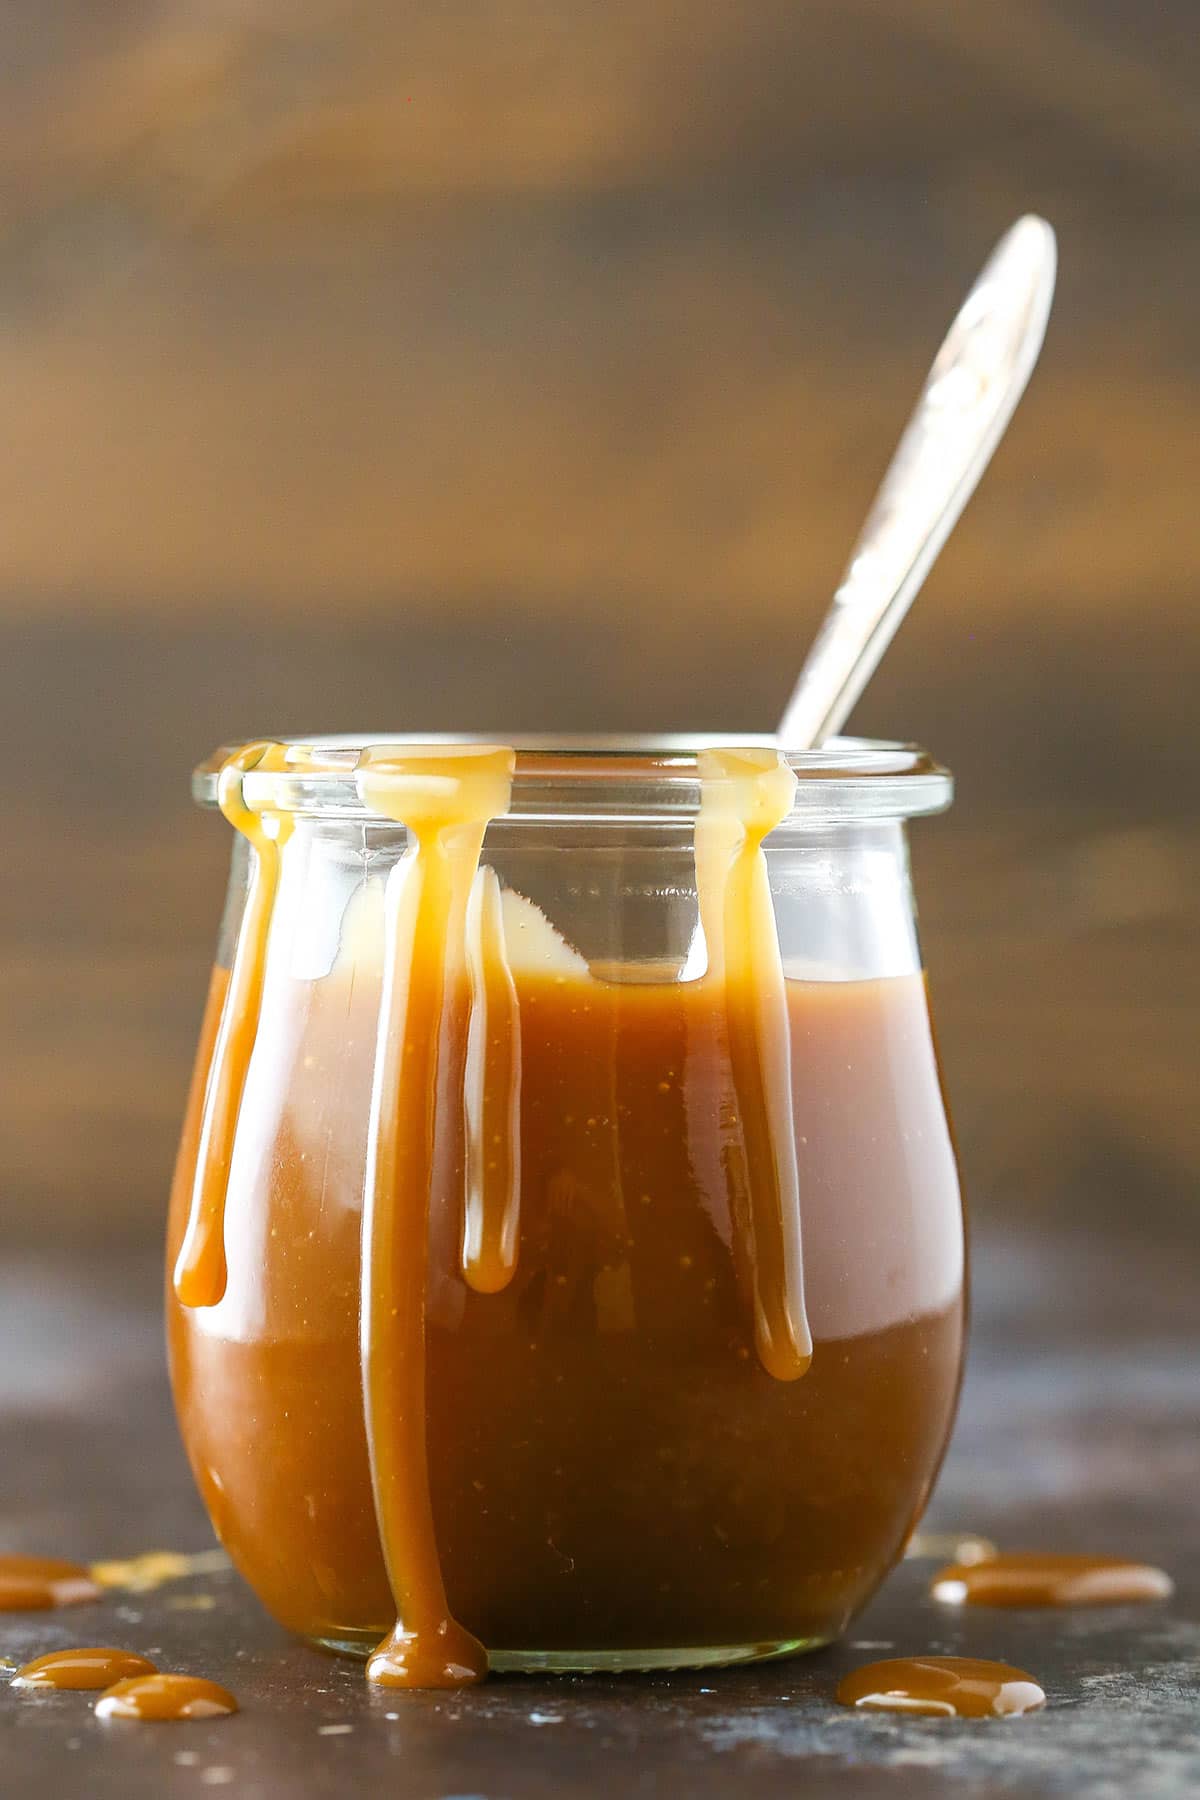 A jar of caramel sauce with a spoon on it.